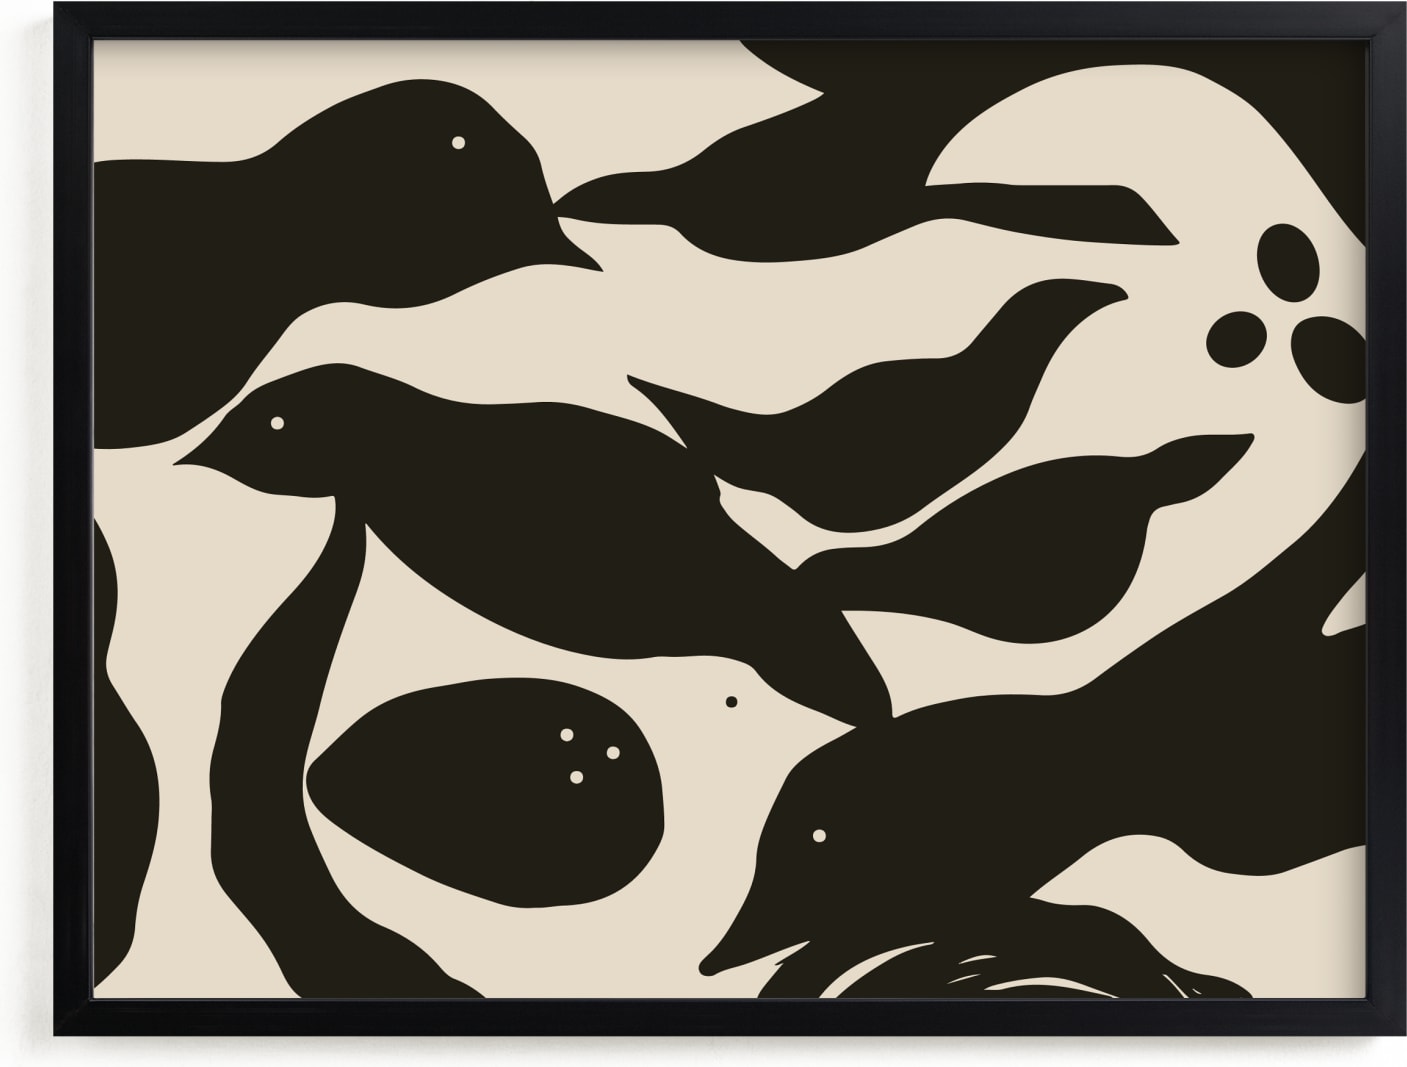 This is a black art by Mary Ketch called Swimming Birds.